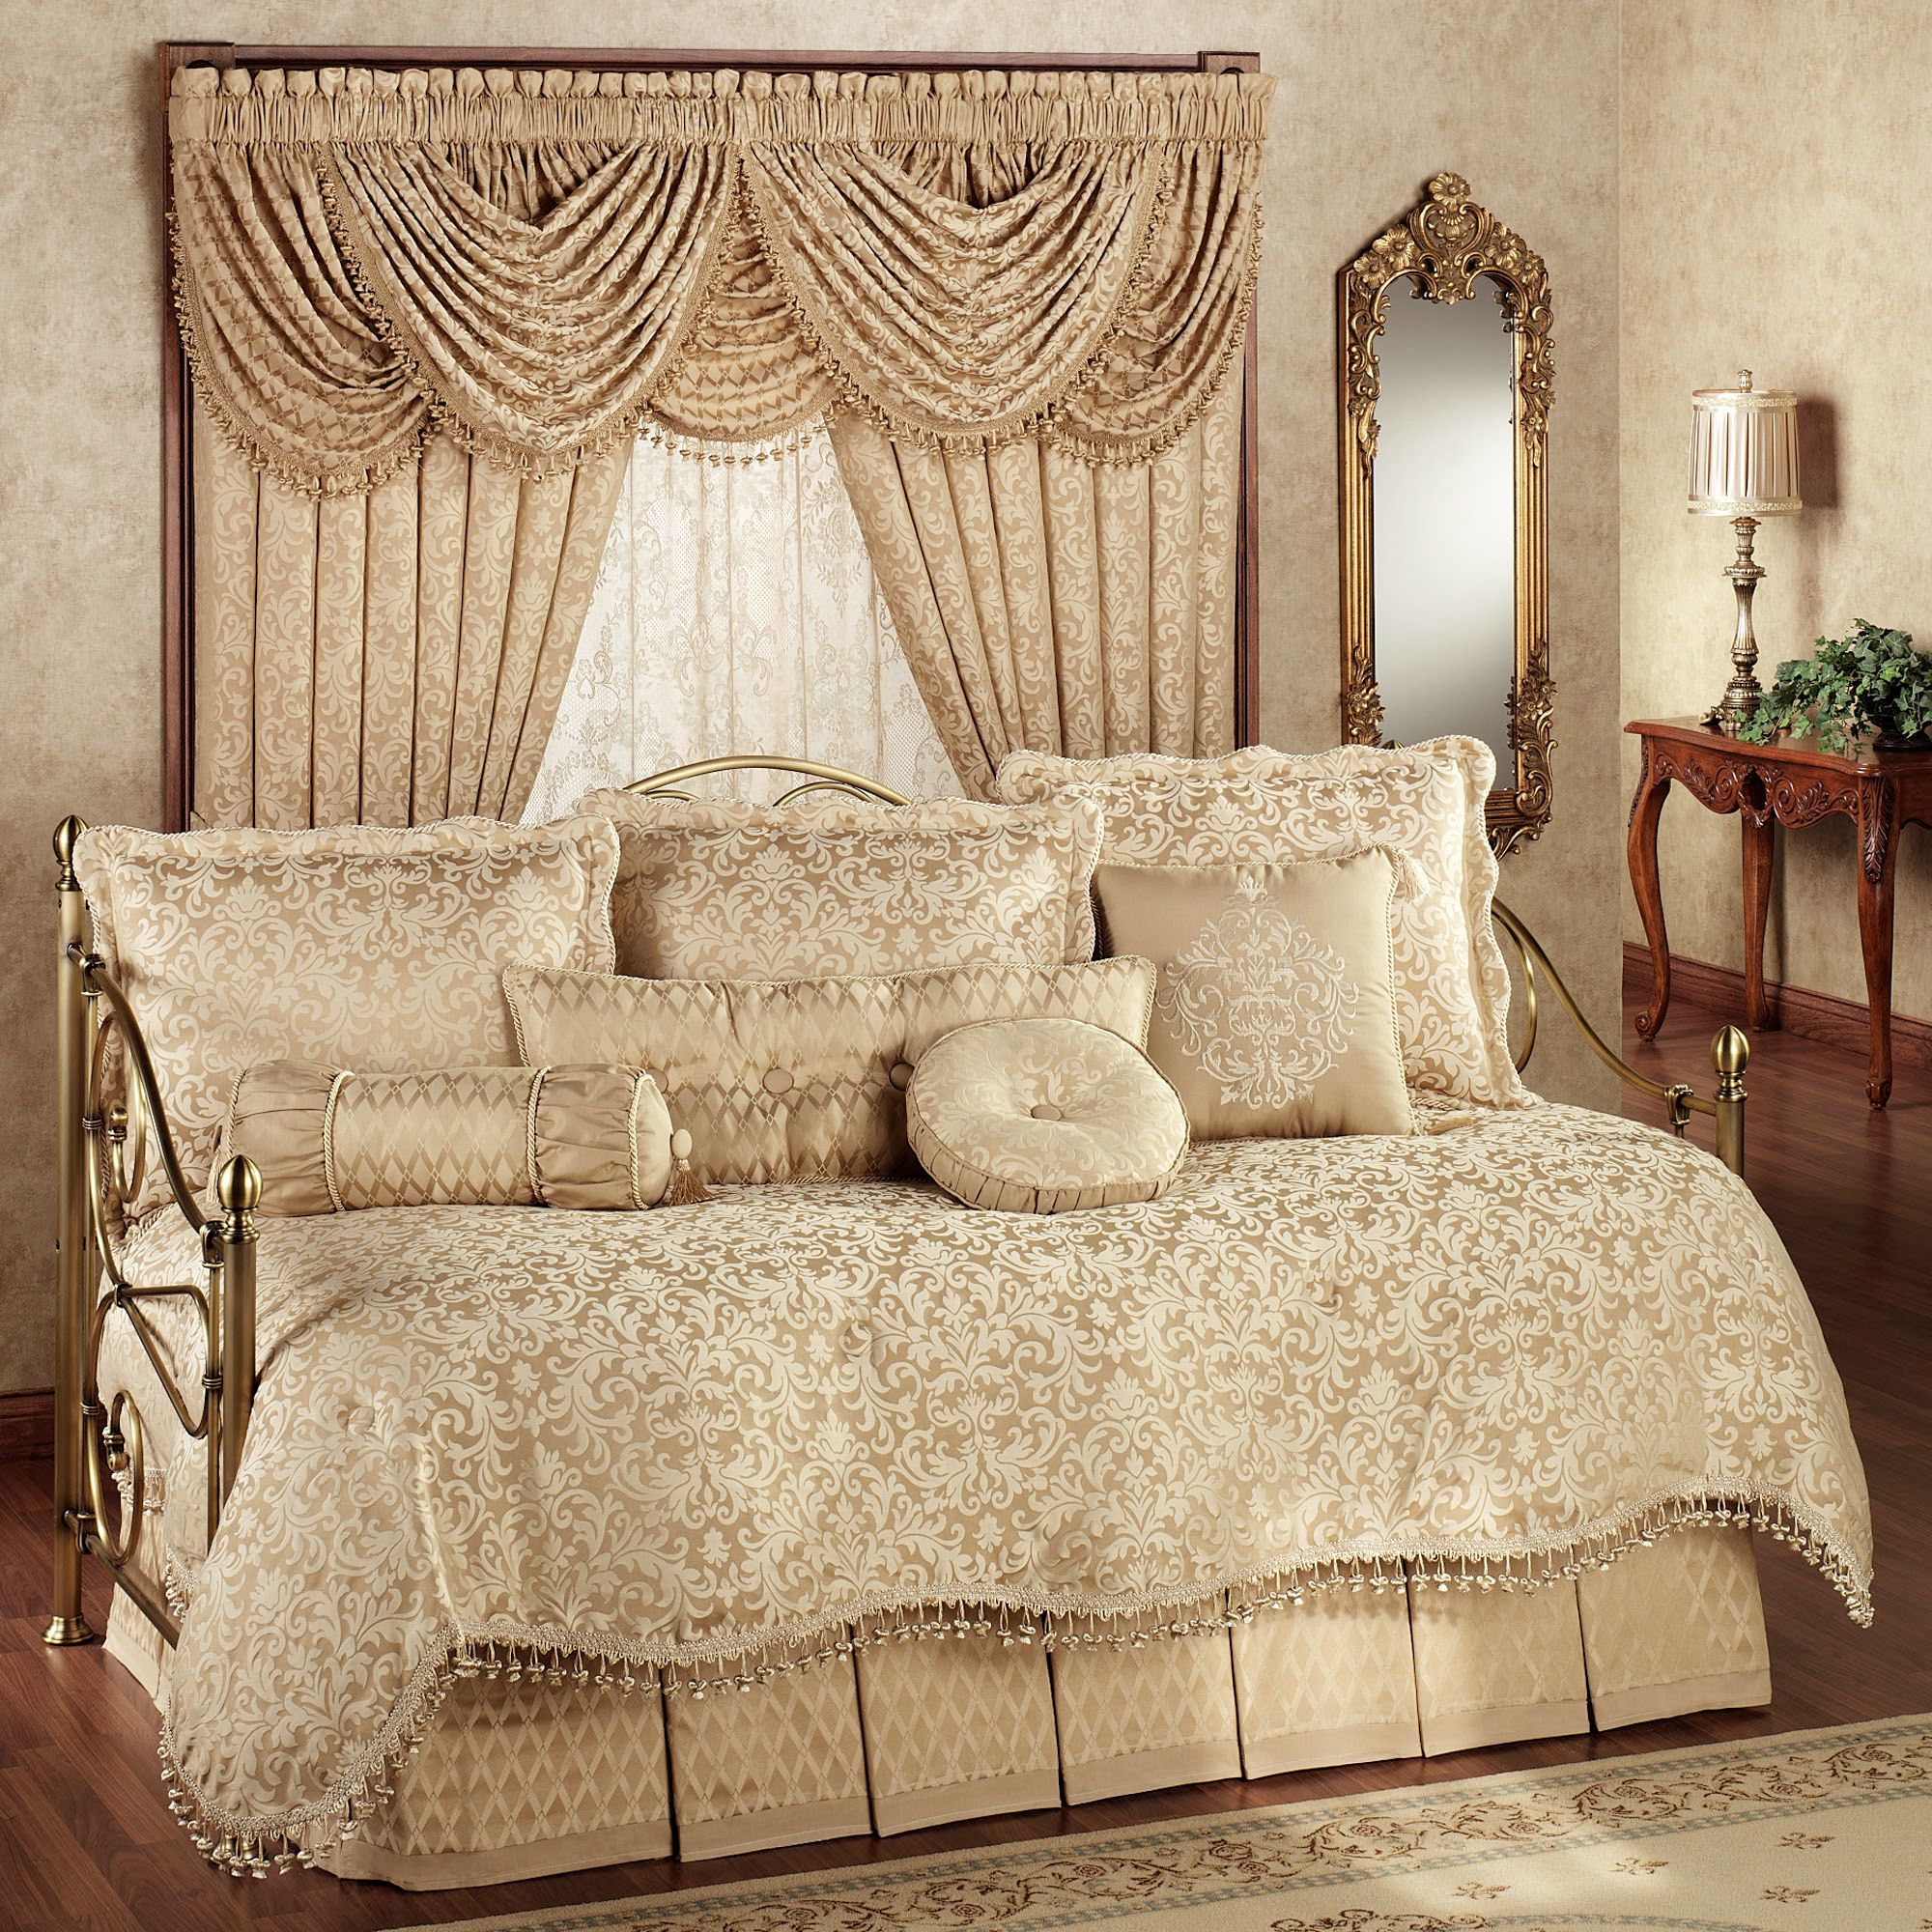 brown daybed bedding sets photo - 6